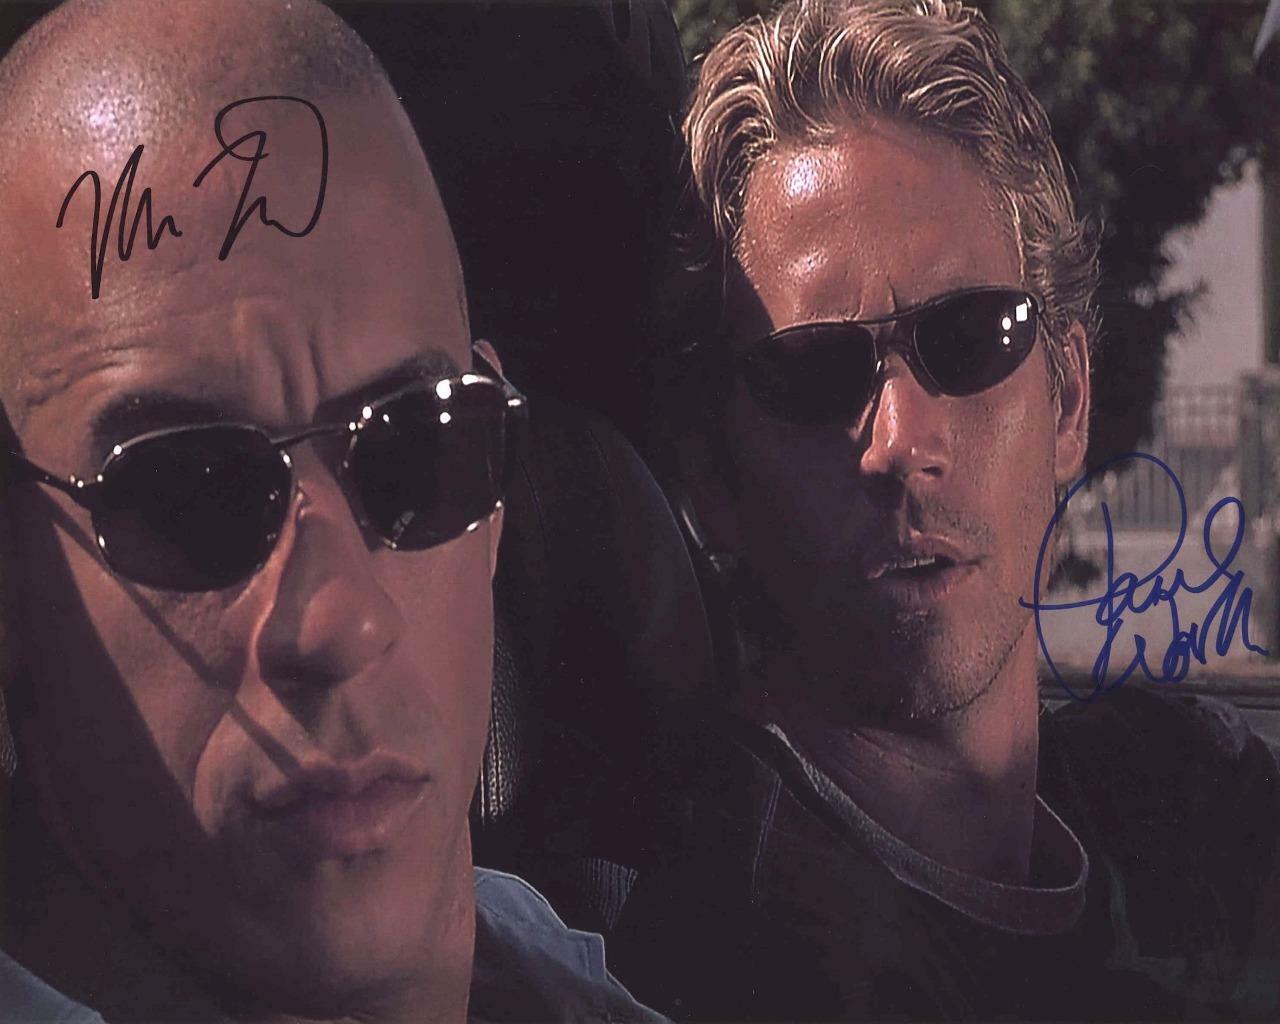 THE FAST AND THE FURIOUS SIGNED AUTOGRAPHED 10X8 REPRO Photo Poster painting PRINT Diesel,Walker